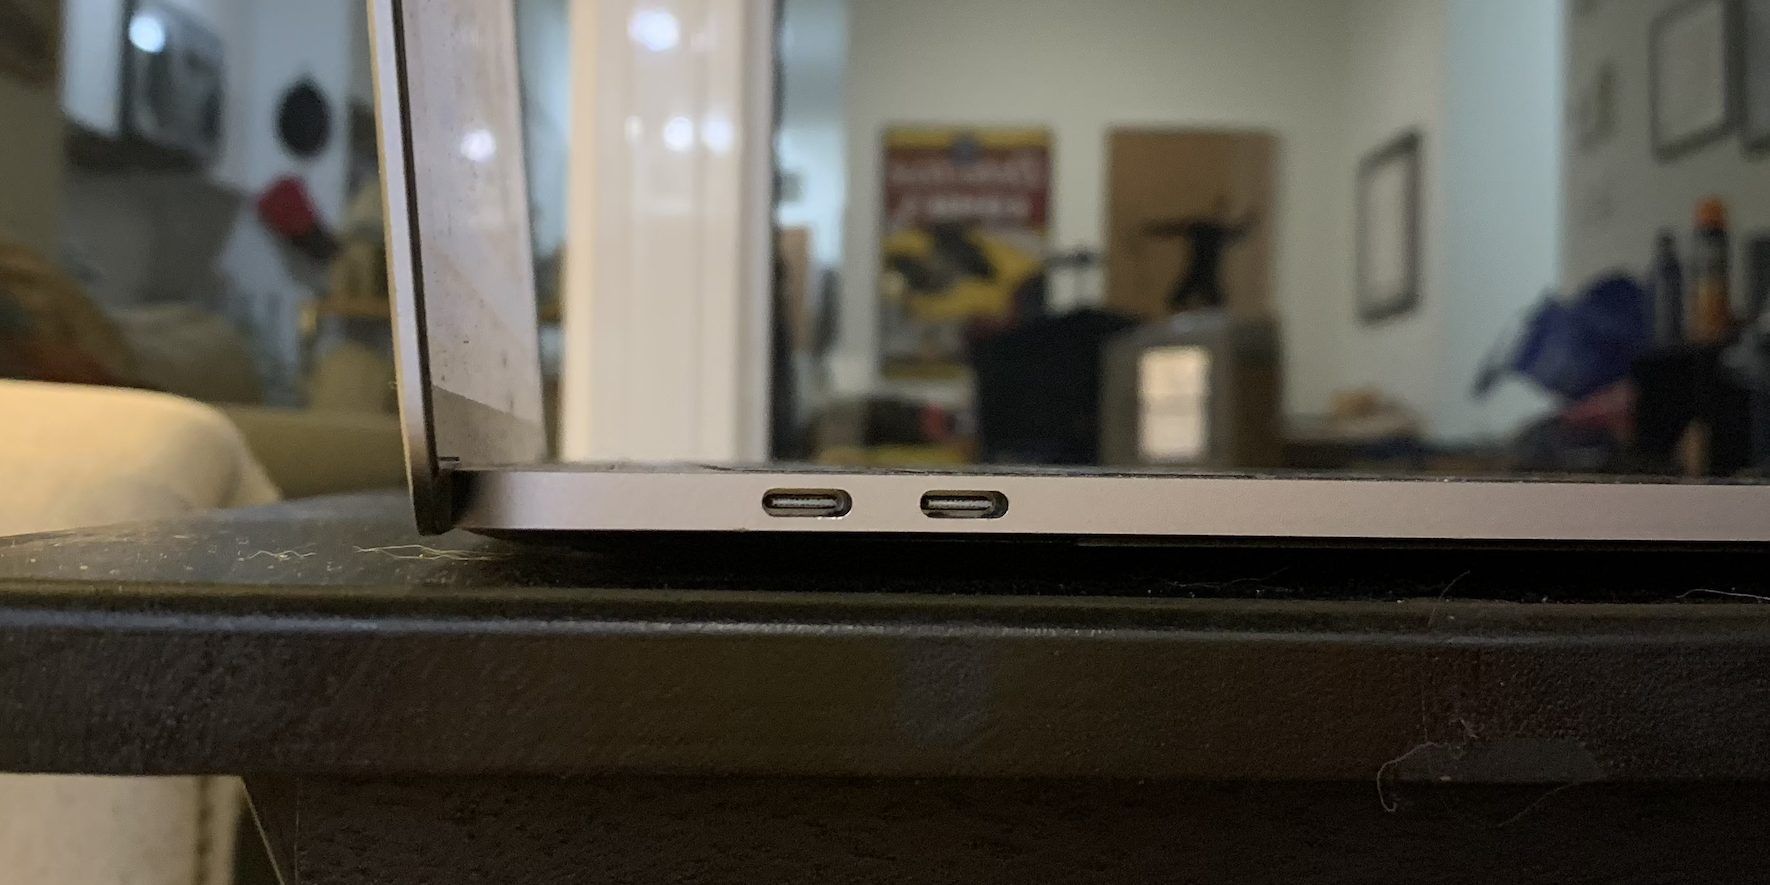 The view of two USB-C ports on the side of a 2017 MacBook Pro